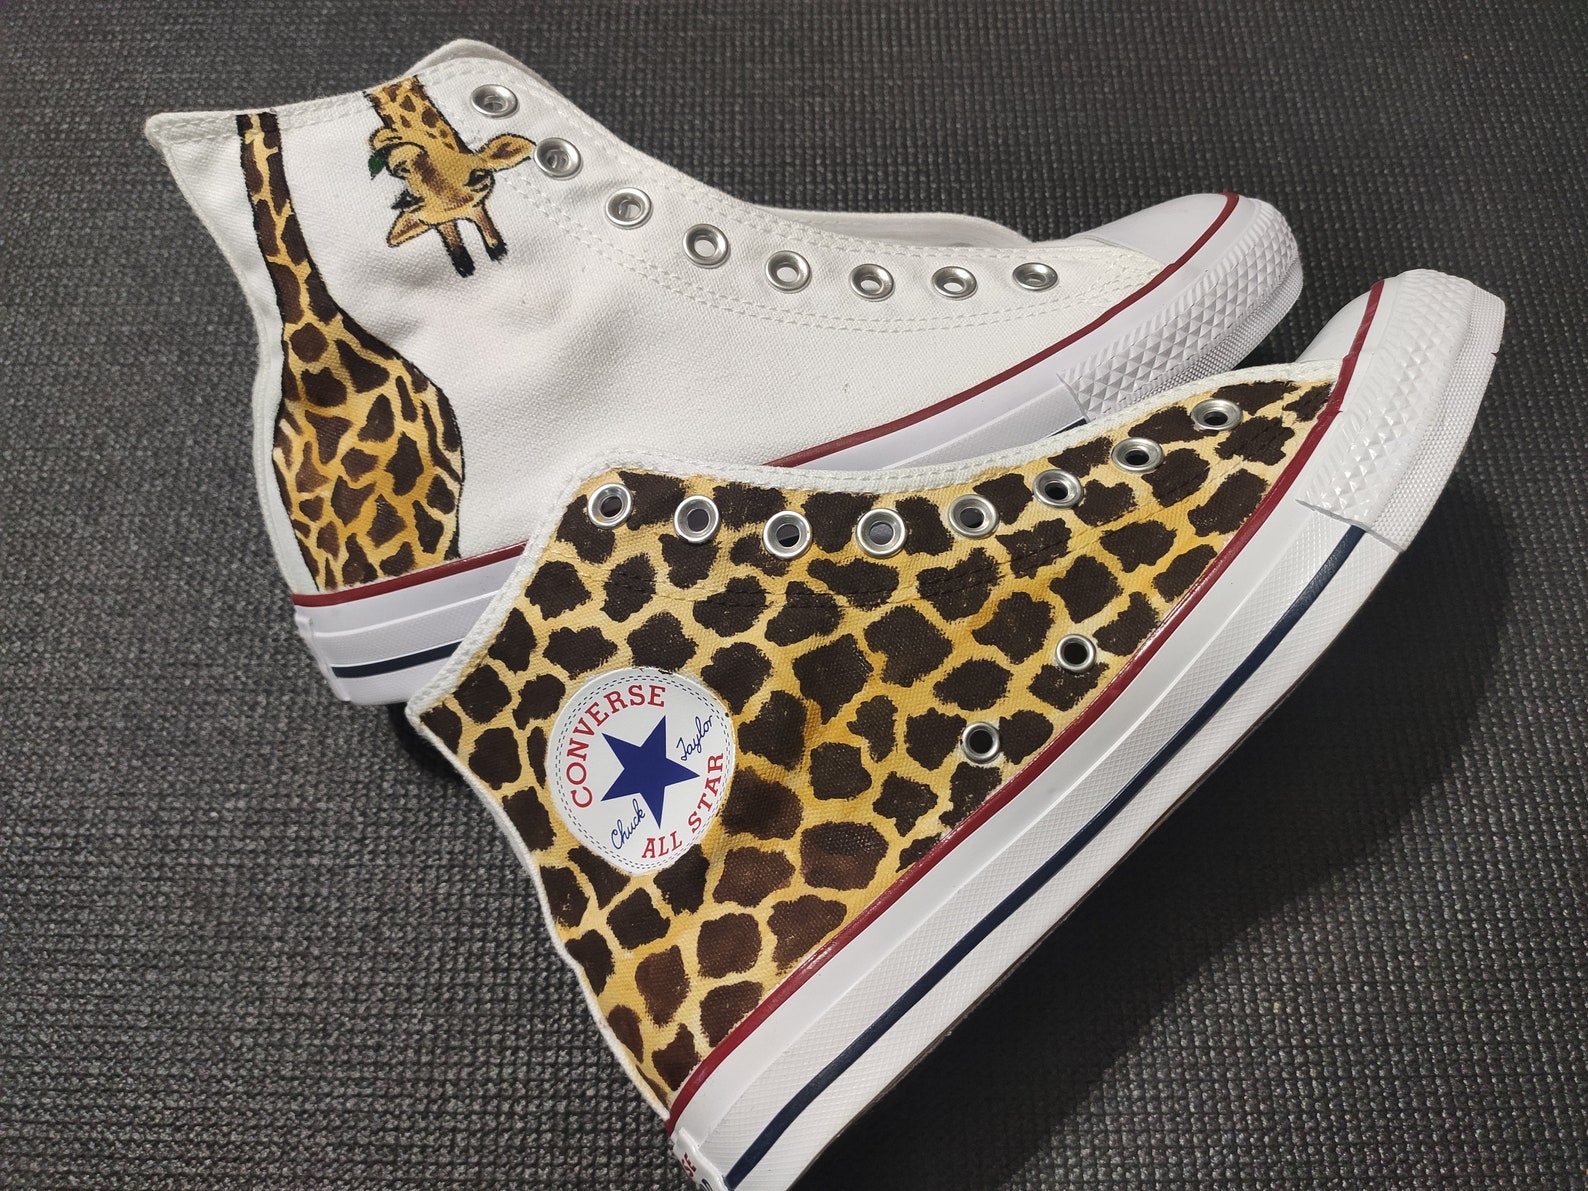 Giraffe design with print high top converse hand painted | Etsy